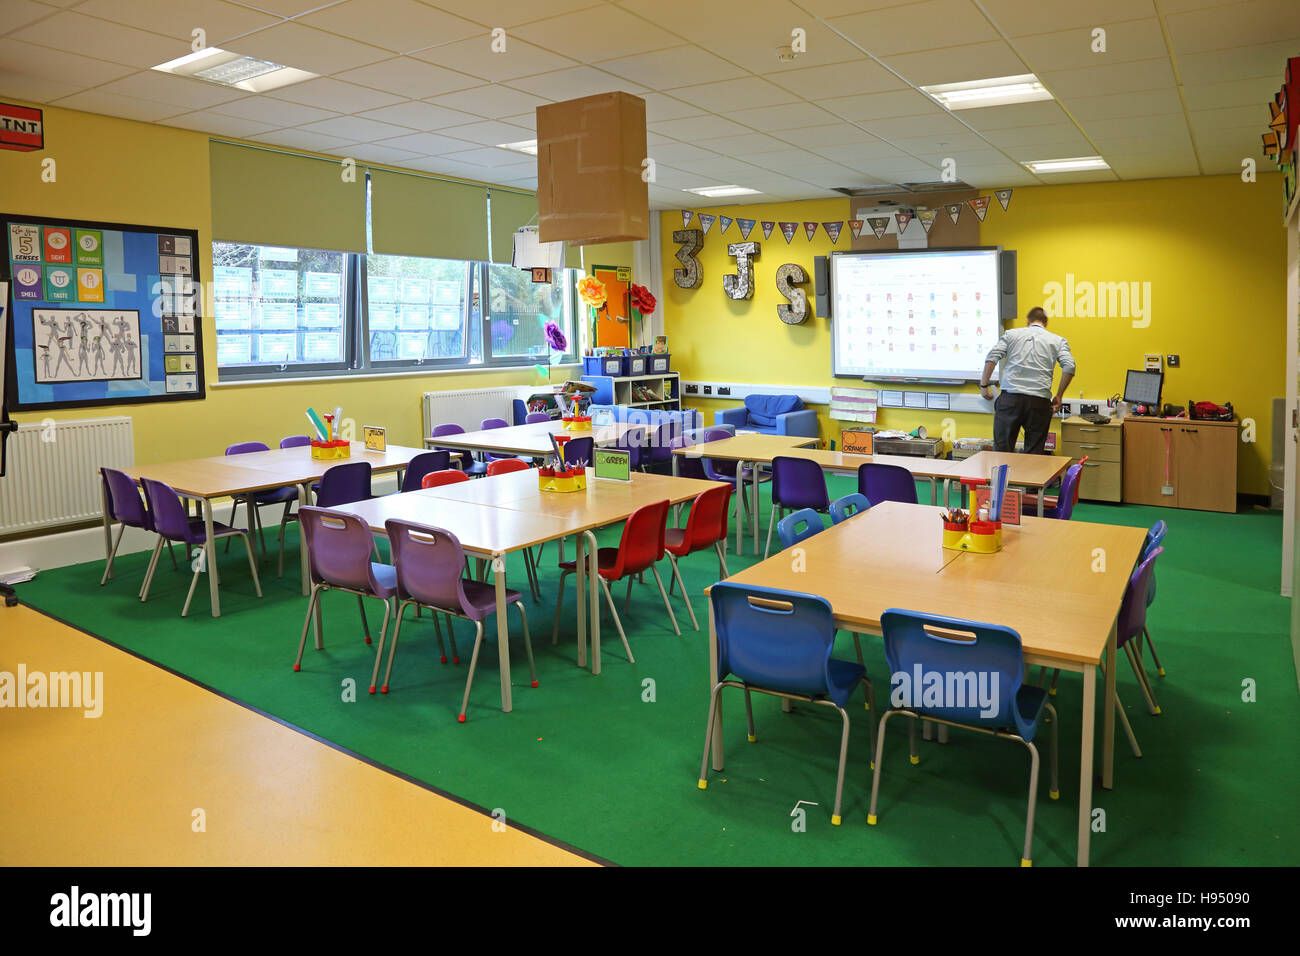 Brightly coloured interior of a modern year 1 school classroom showing tables, chairs and artwork on walls. Shows teacher. Stock Photo